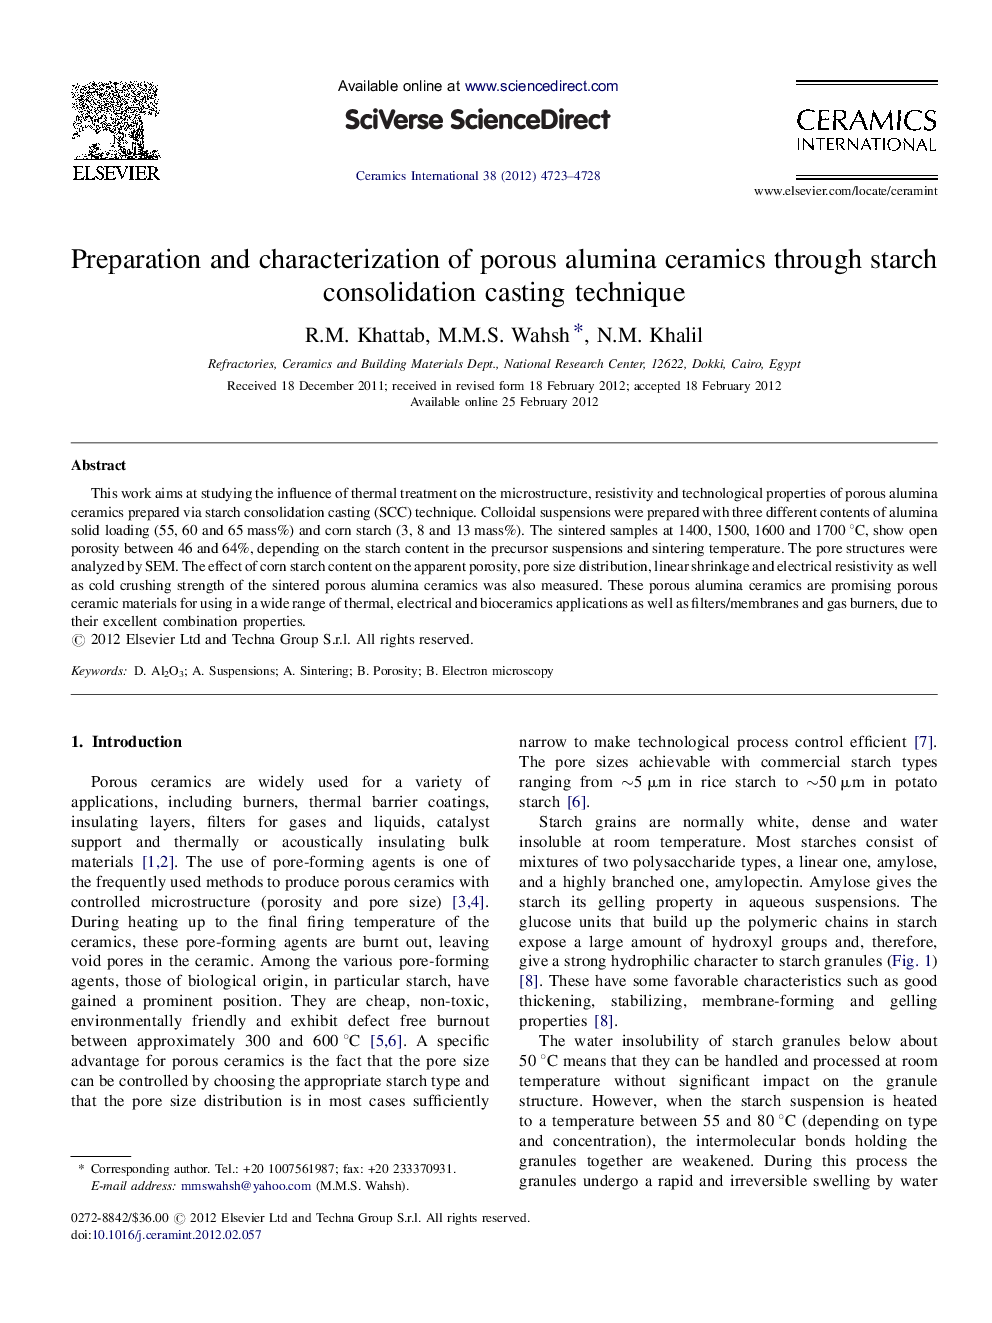 Preparation and characterization of porous alumina ceramics through starch consolidation casting technique